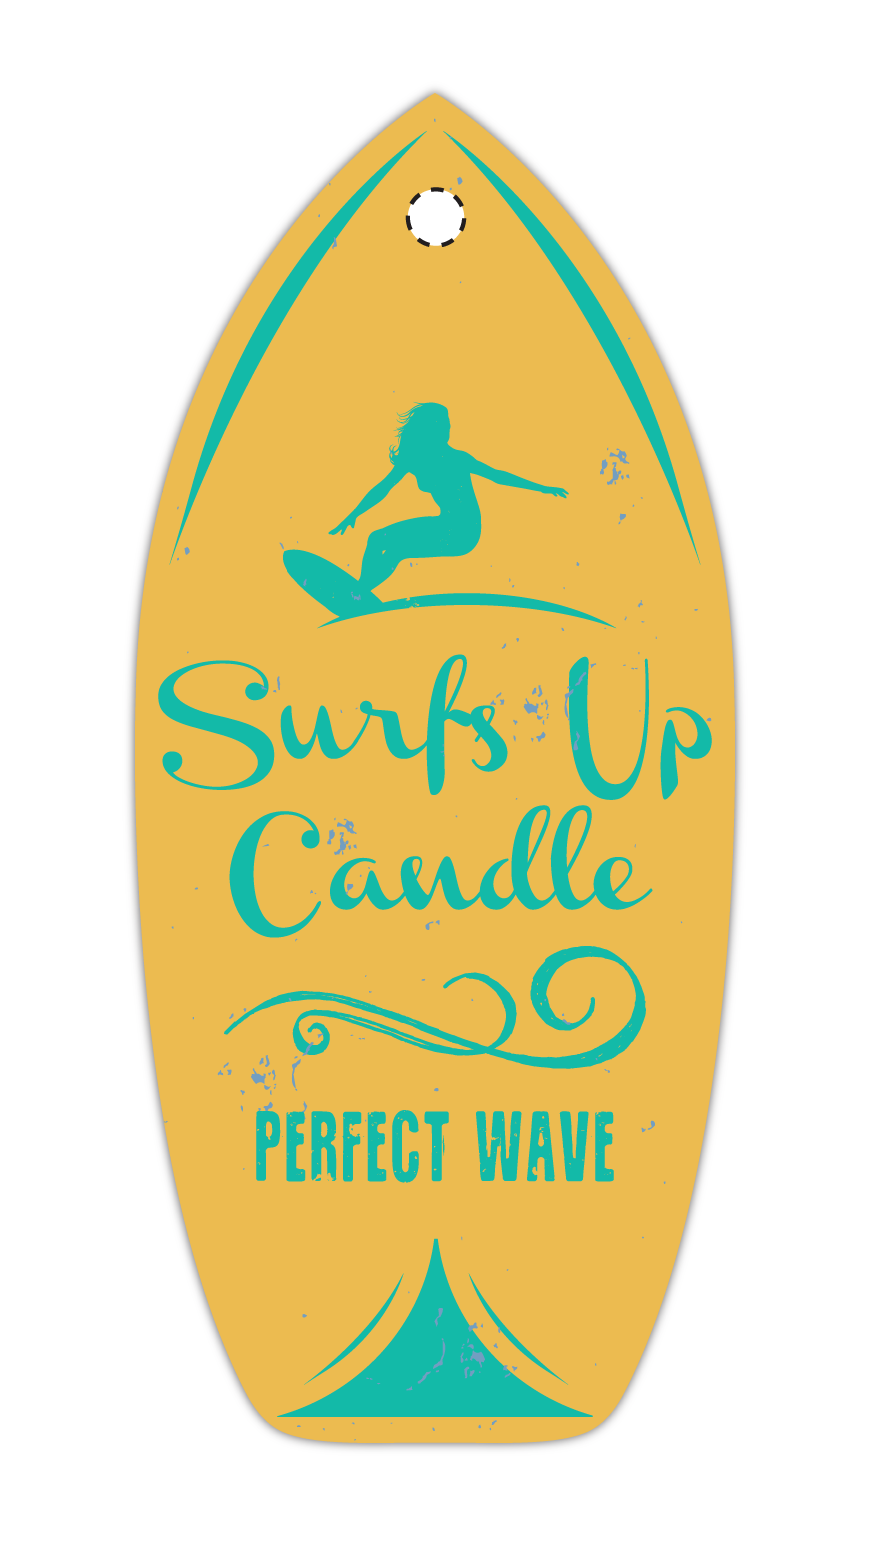 Perfect Wave Air Freshener - Pack of 3